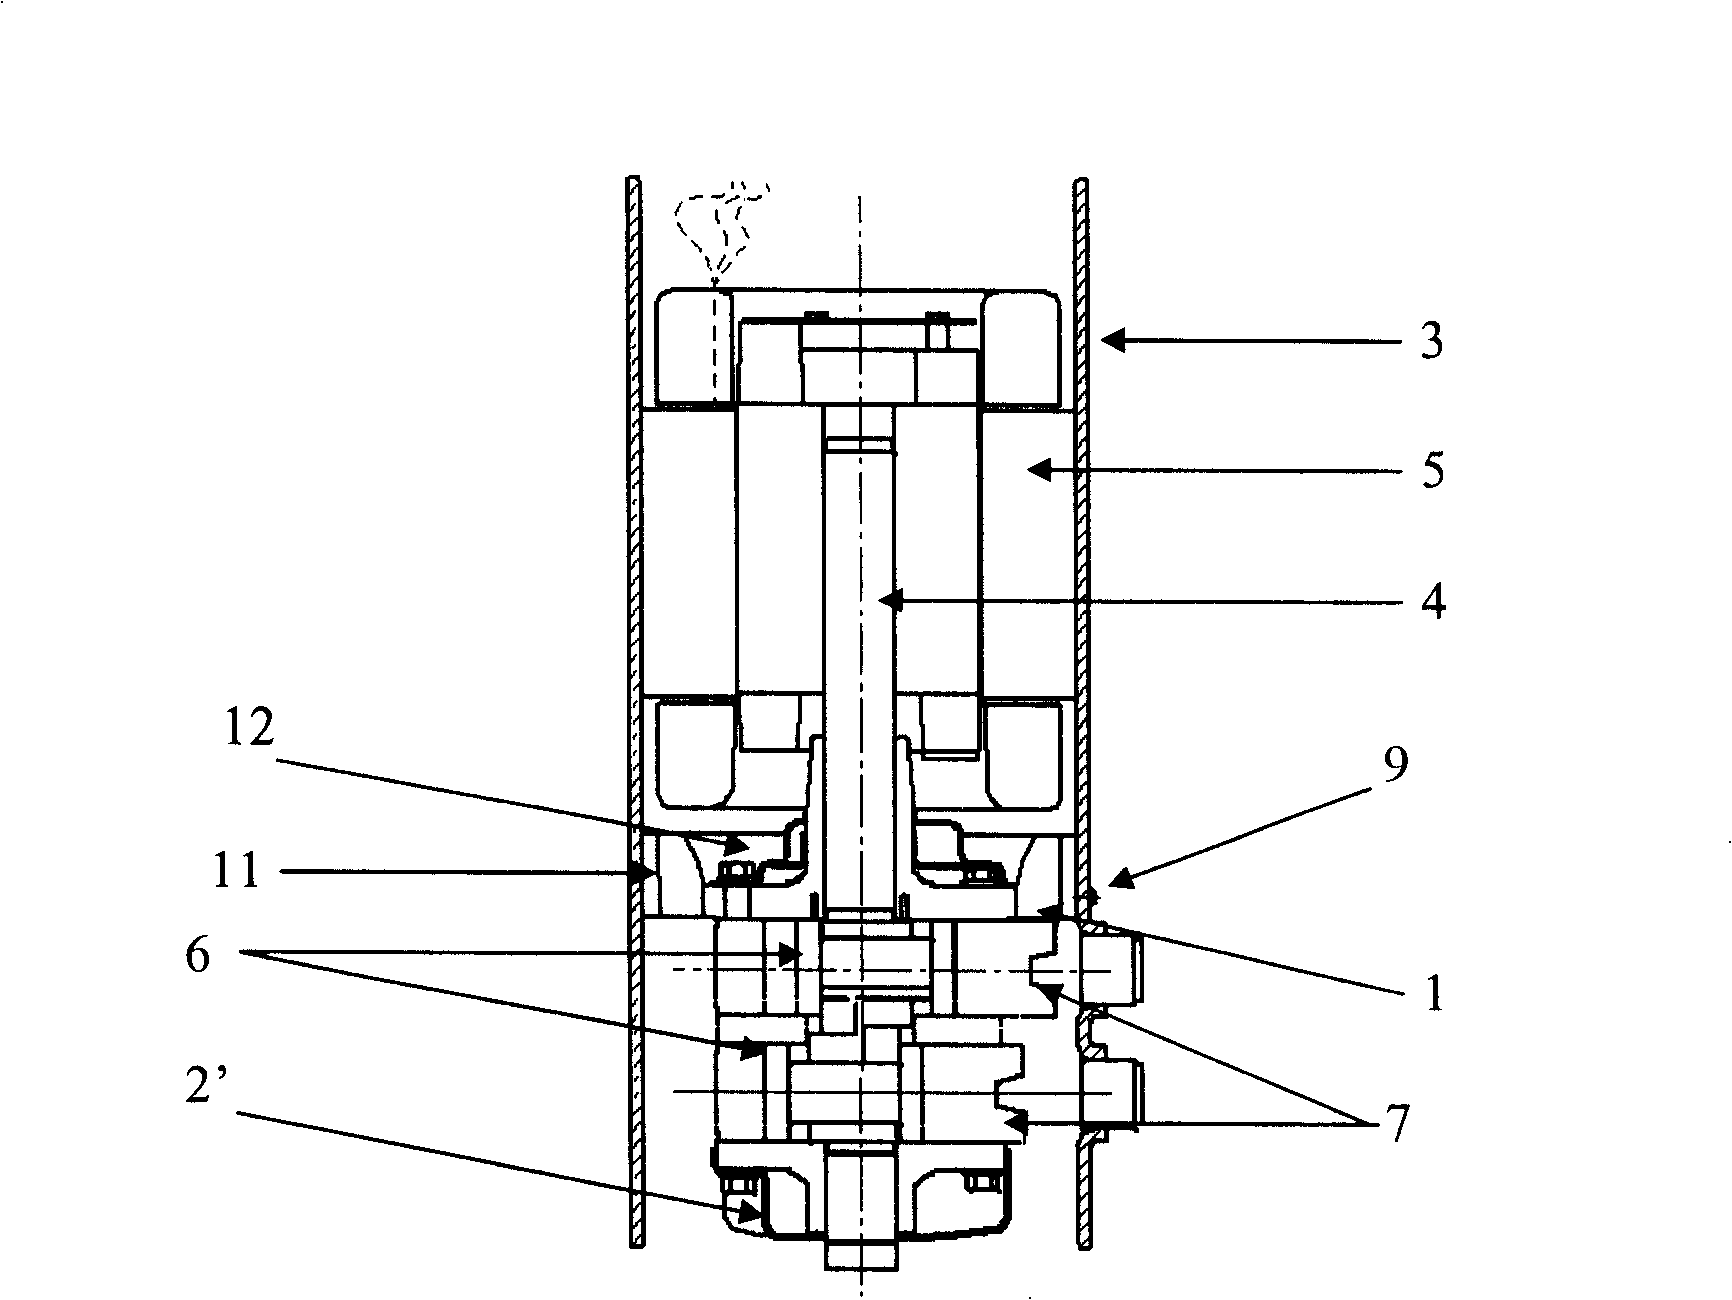 Rotary piston type compressor pump assembly